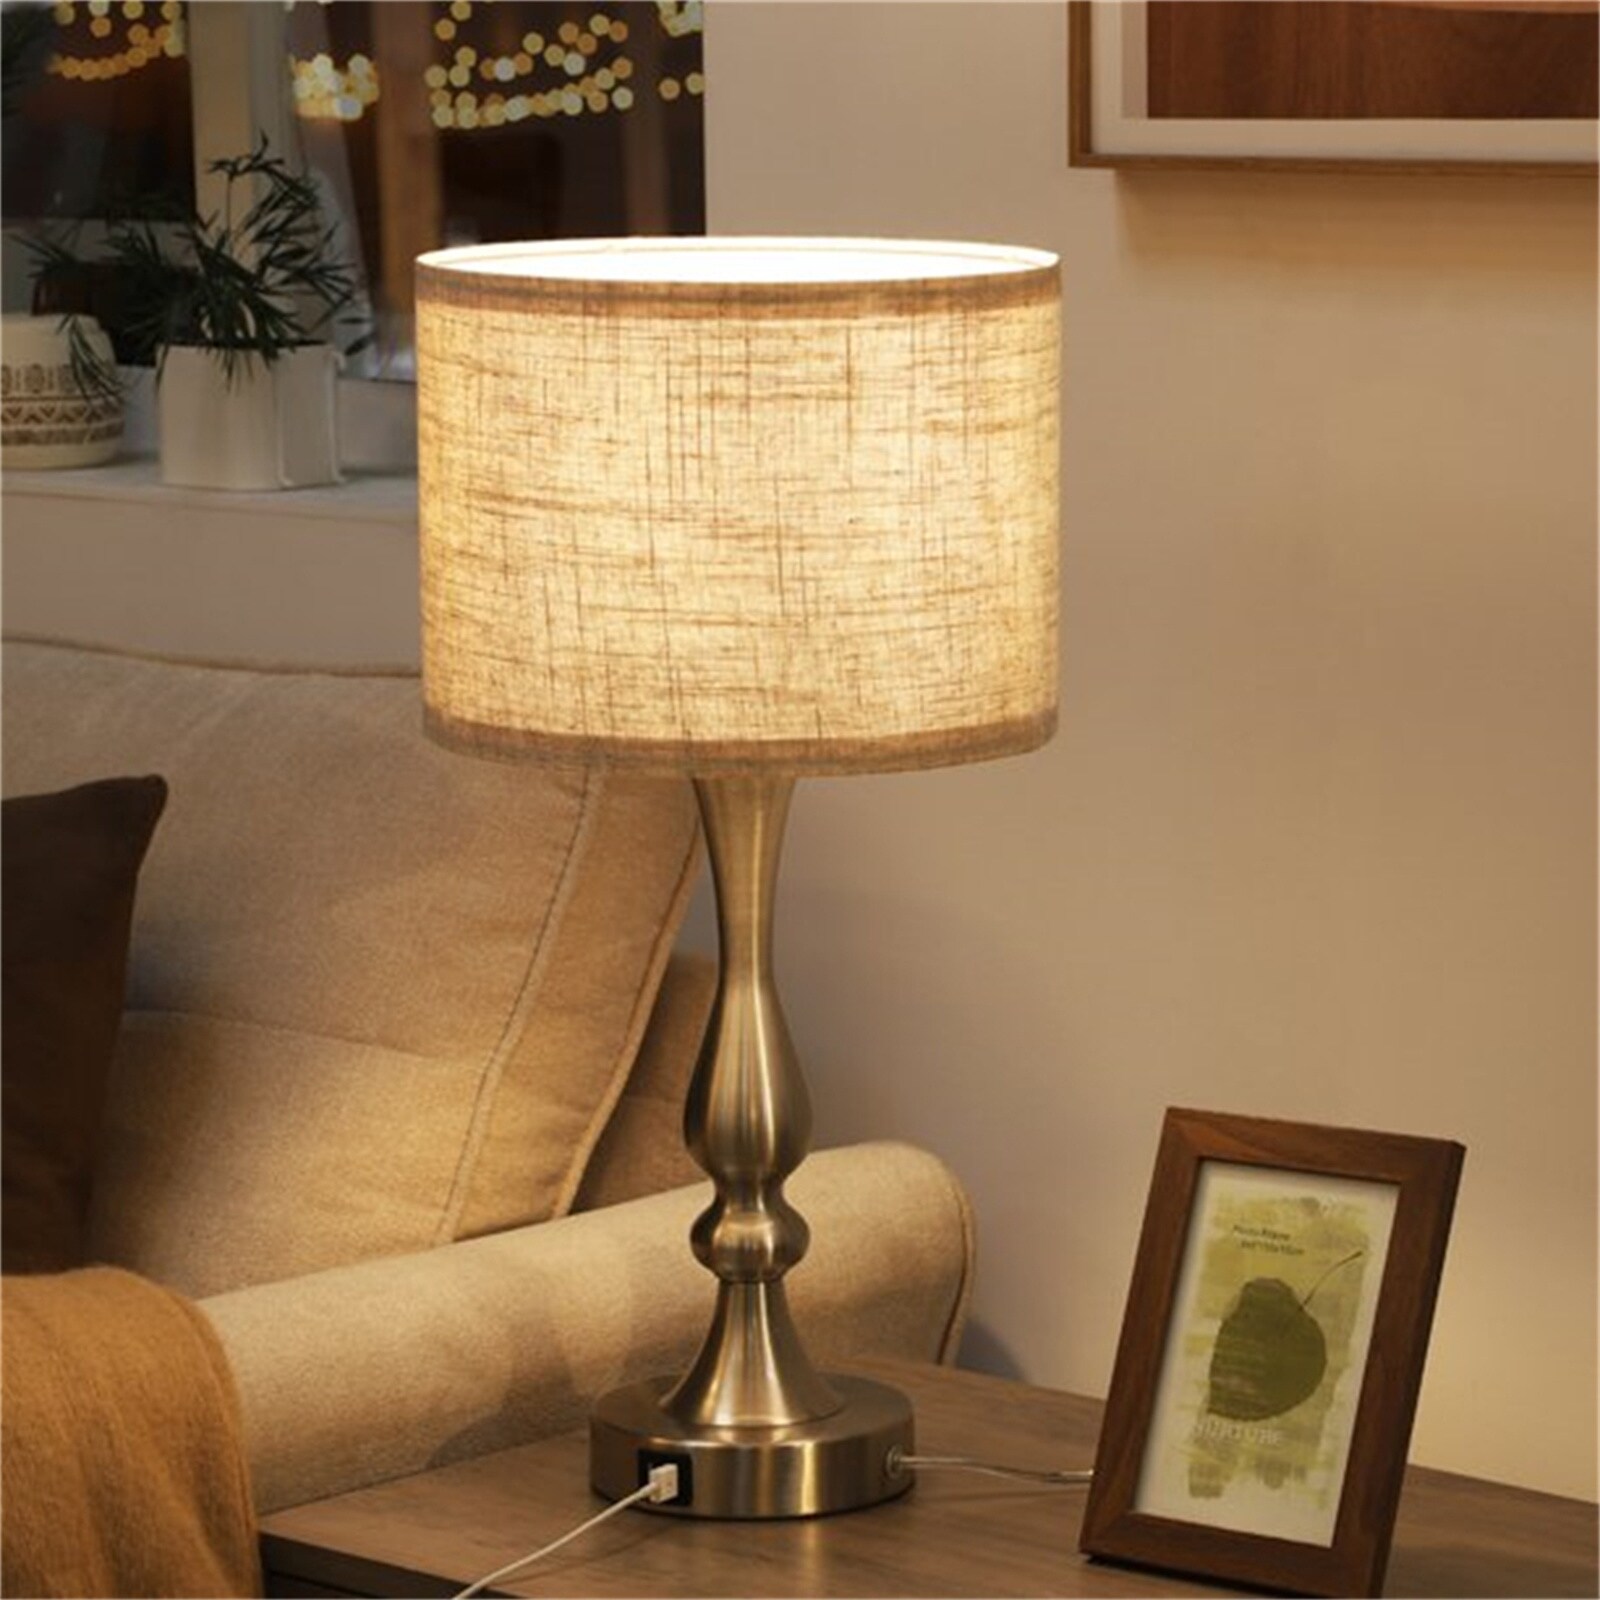 3-Way Dimmable Touch Control Small Table Lamp with 2 USB Port, Brushed  Steel - On Sale - Bed Bath & Beyond - 32856785